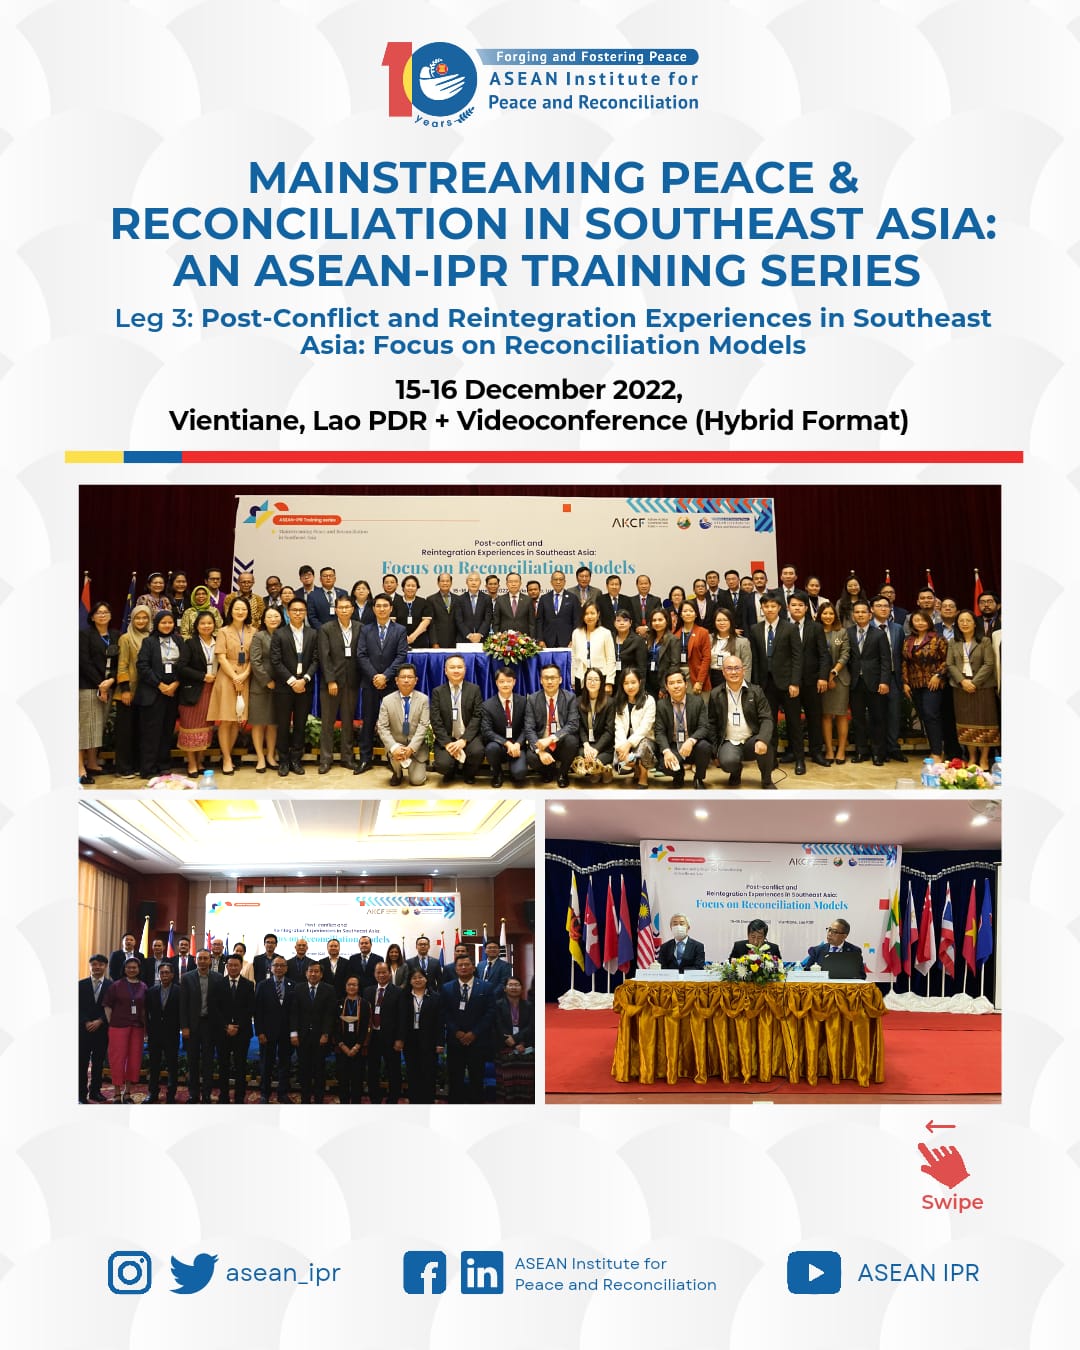 MAINSTREAMING PEACE RECONCILIATION IN SOUTHEAST ASIA: AN ASEAN-IPR TRAINING SERIES